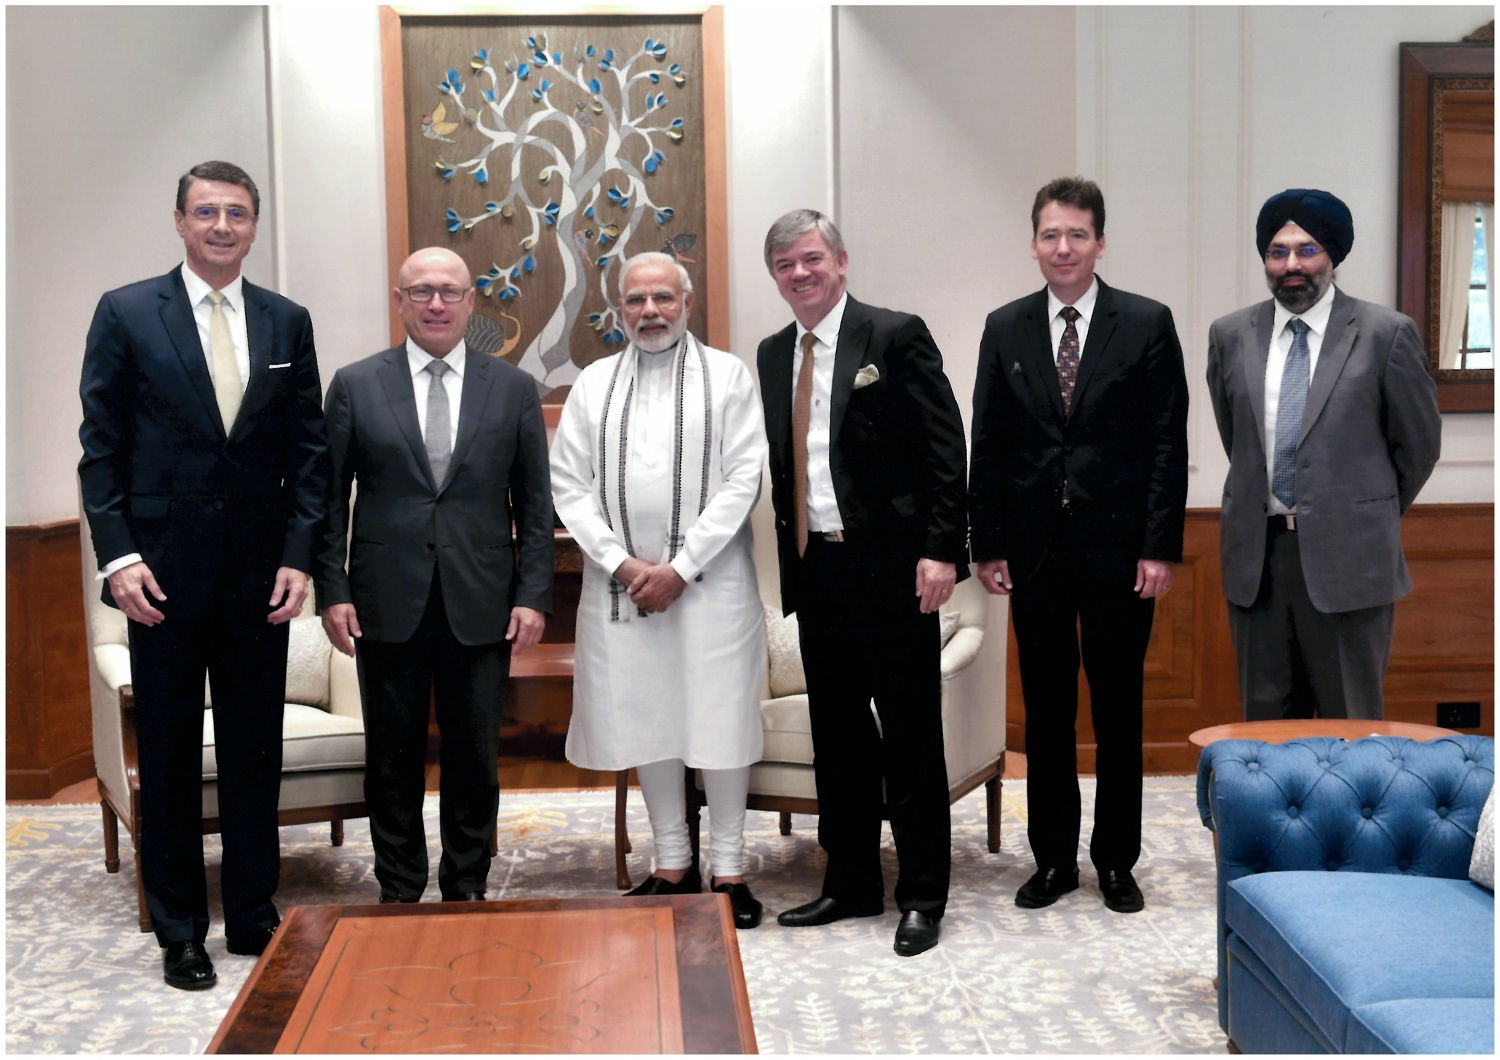 ŠKODA AUTO CEO Bernhard Maier and Gurpratap Boparai, Managing Director of ŠKODA AUTO India Private Ltd, today announced details of the 'INDIA 2.0' project at a press conference in New Delhi. They then met with Indian Prime Minister Narendra Modi. 
Left to Right: H E Dr Martin Ney, German Ambassador in India, Bernhard Maier, ŠKODA AUTO CEO, Honorable Prime Minister of India - Narendra Modi, H E Milan Hovorka, Czech Ambassador in India, Christian Cahn von Seelen, Head of ŠKODA AUTO Strategic Development, Gurpratap Boparai, Managing Director SKODA AUTO India Private Ltd.